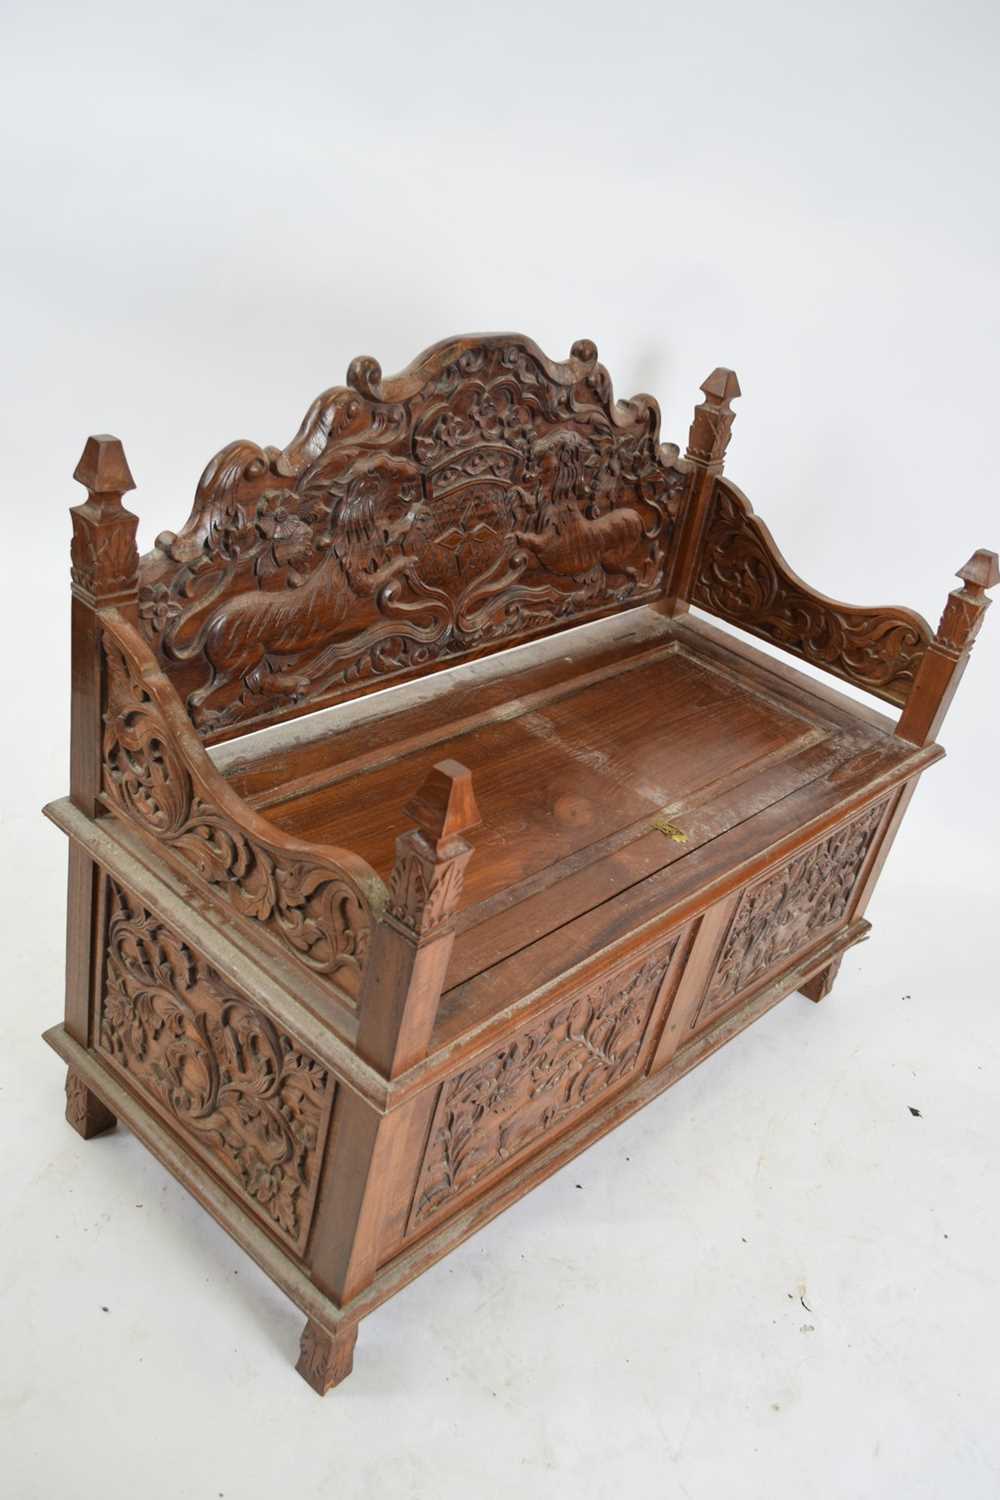 20th century Far Eastern hardwood settle, elaborately carved all over with lion and shield detail to - Image 2 of 4